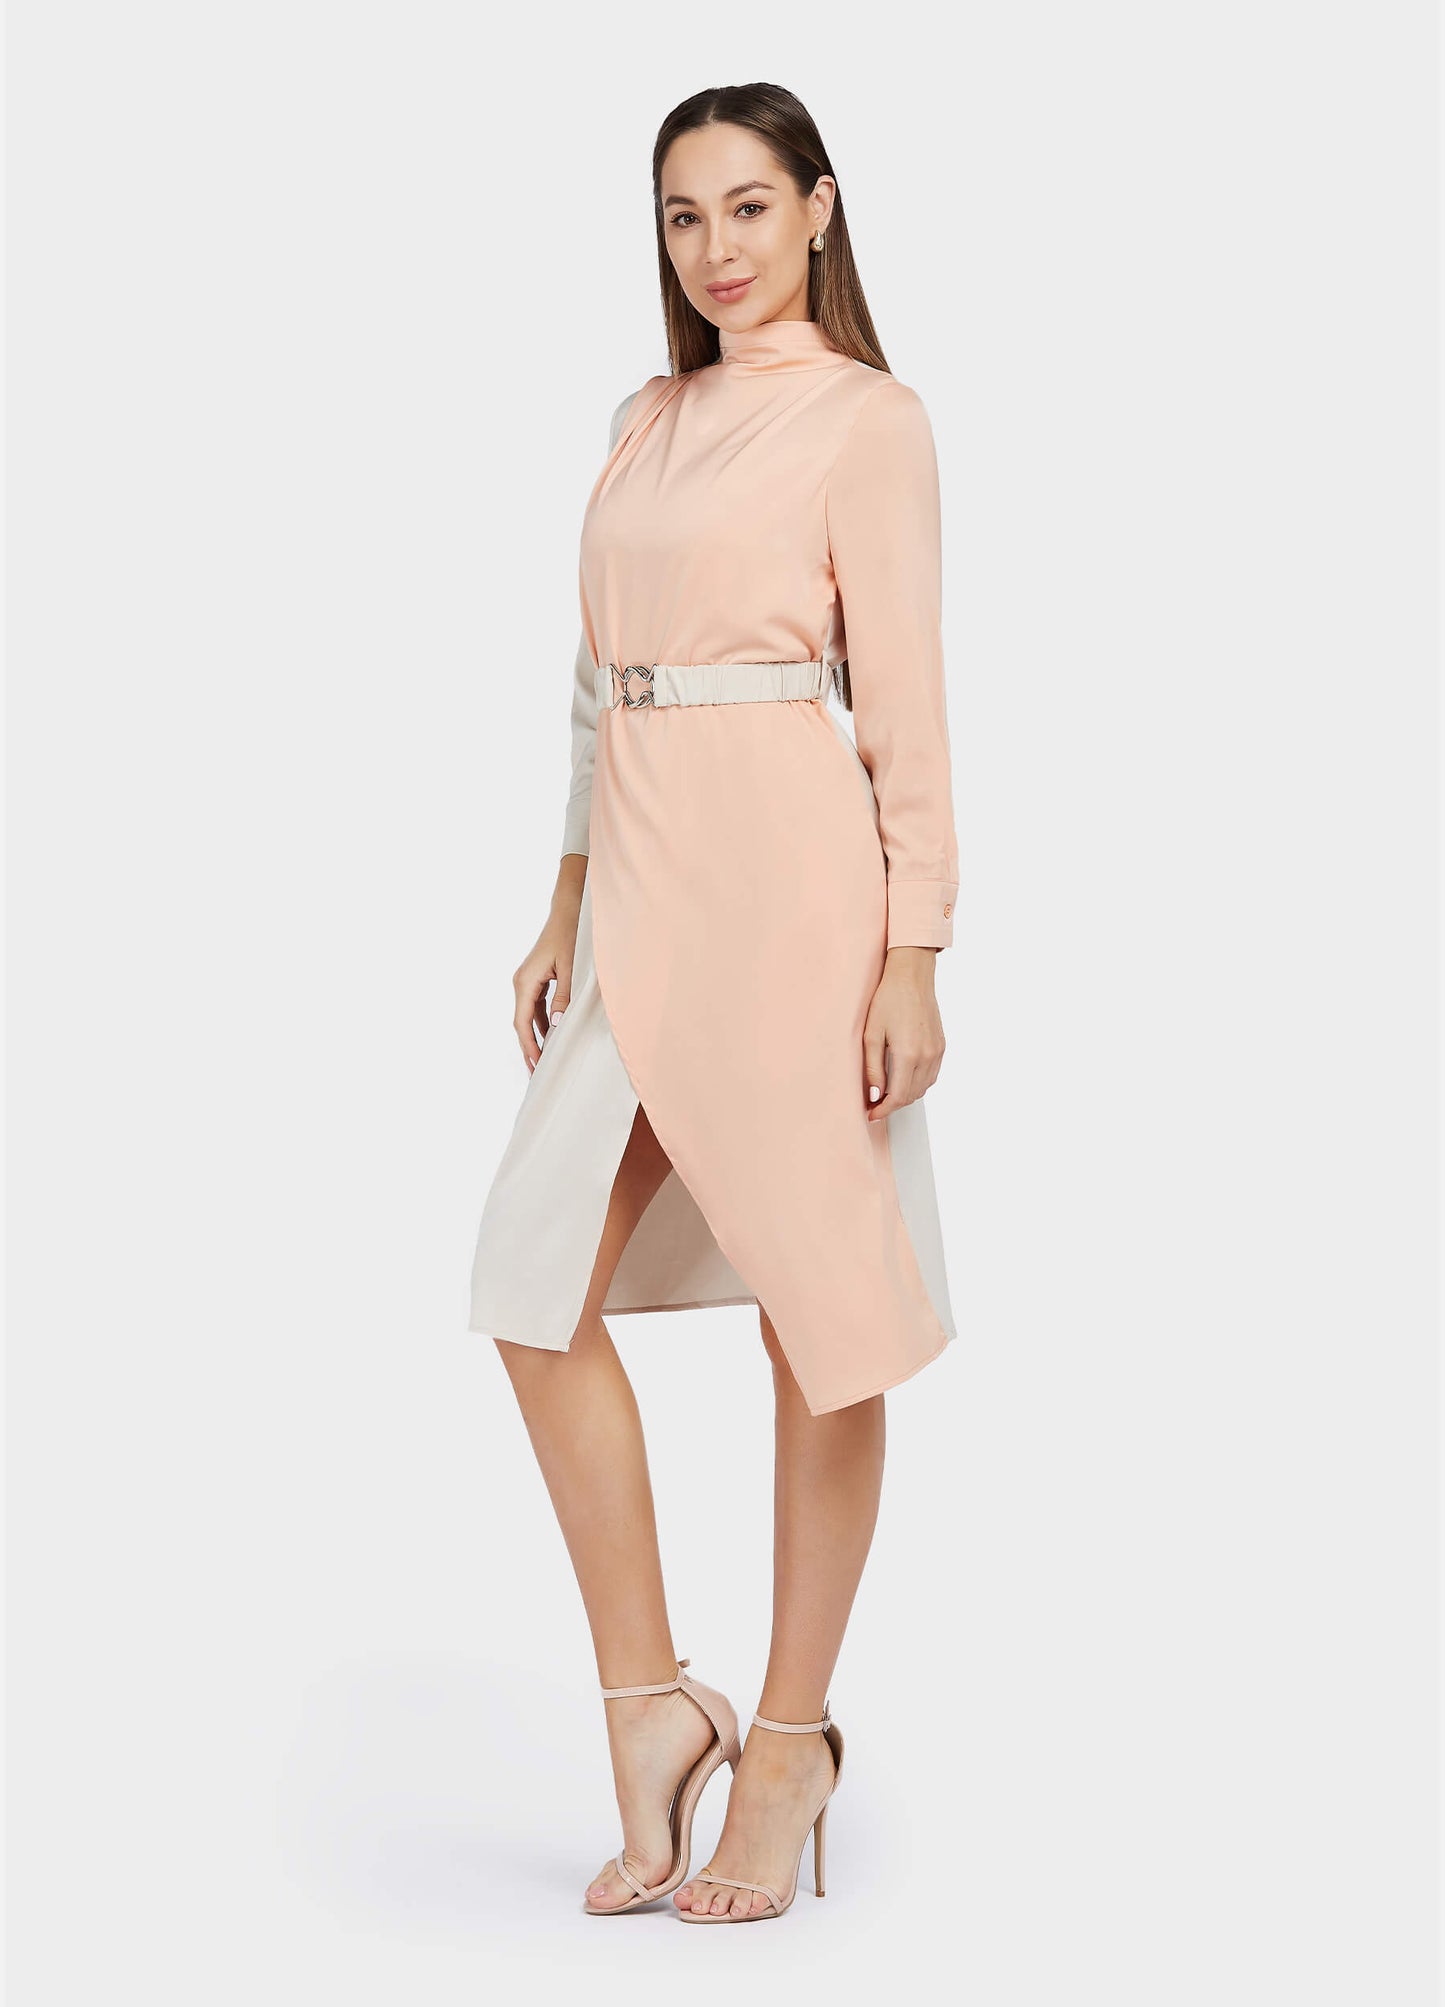 Women's Belted Colorblock High-Neck Long Sleeve Dress-Apricot&Pink side view